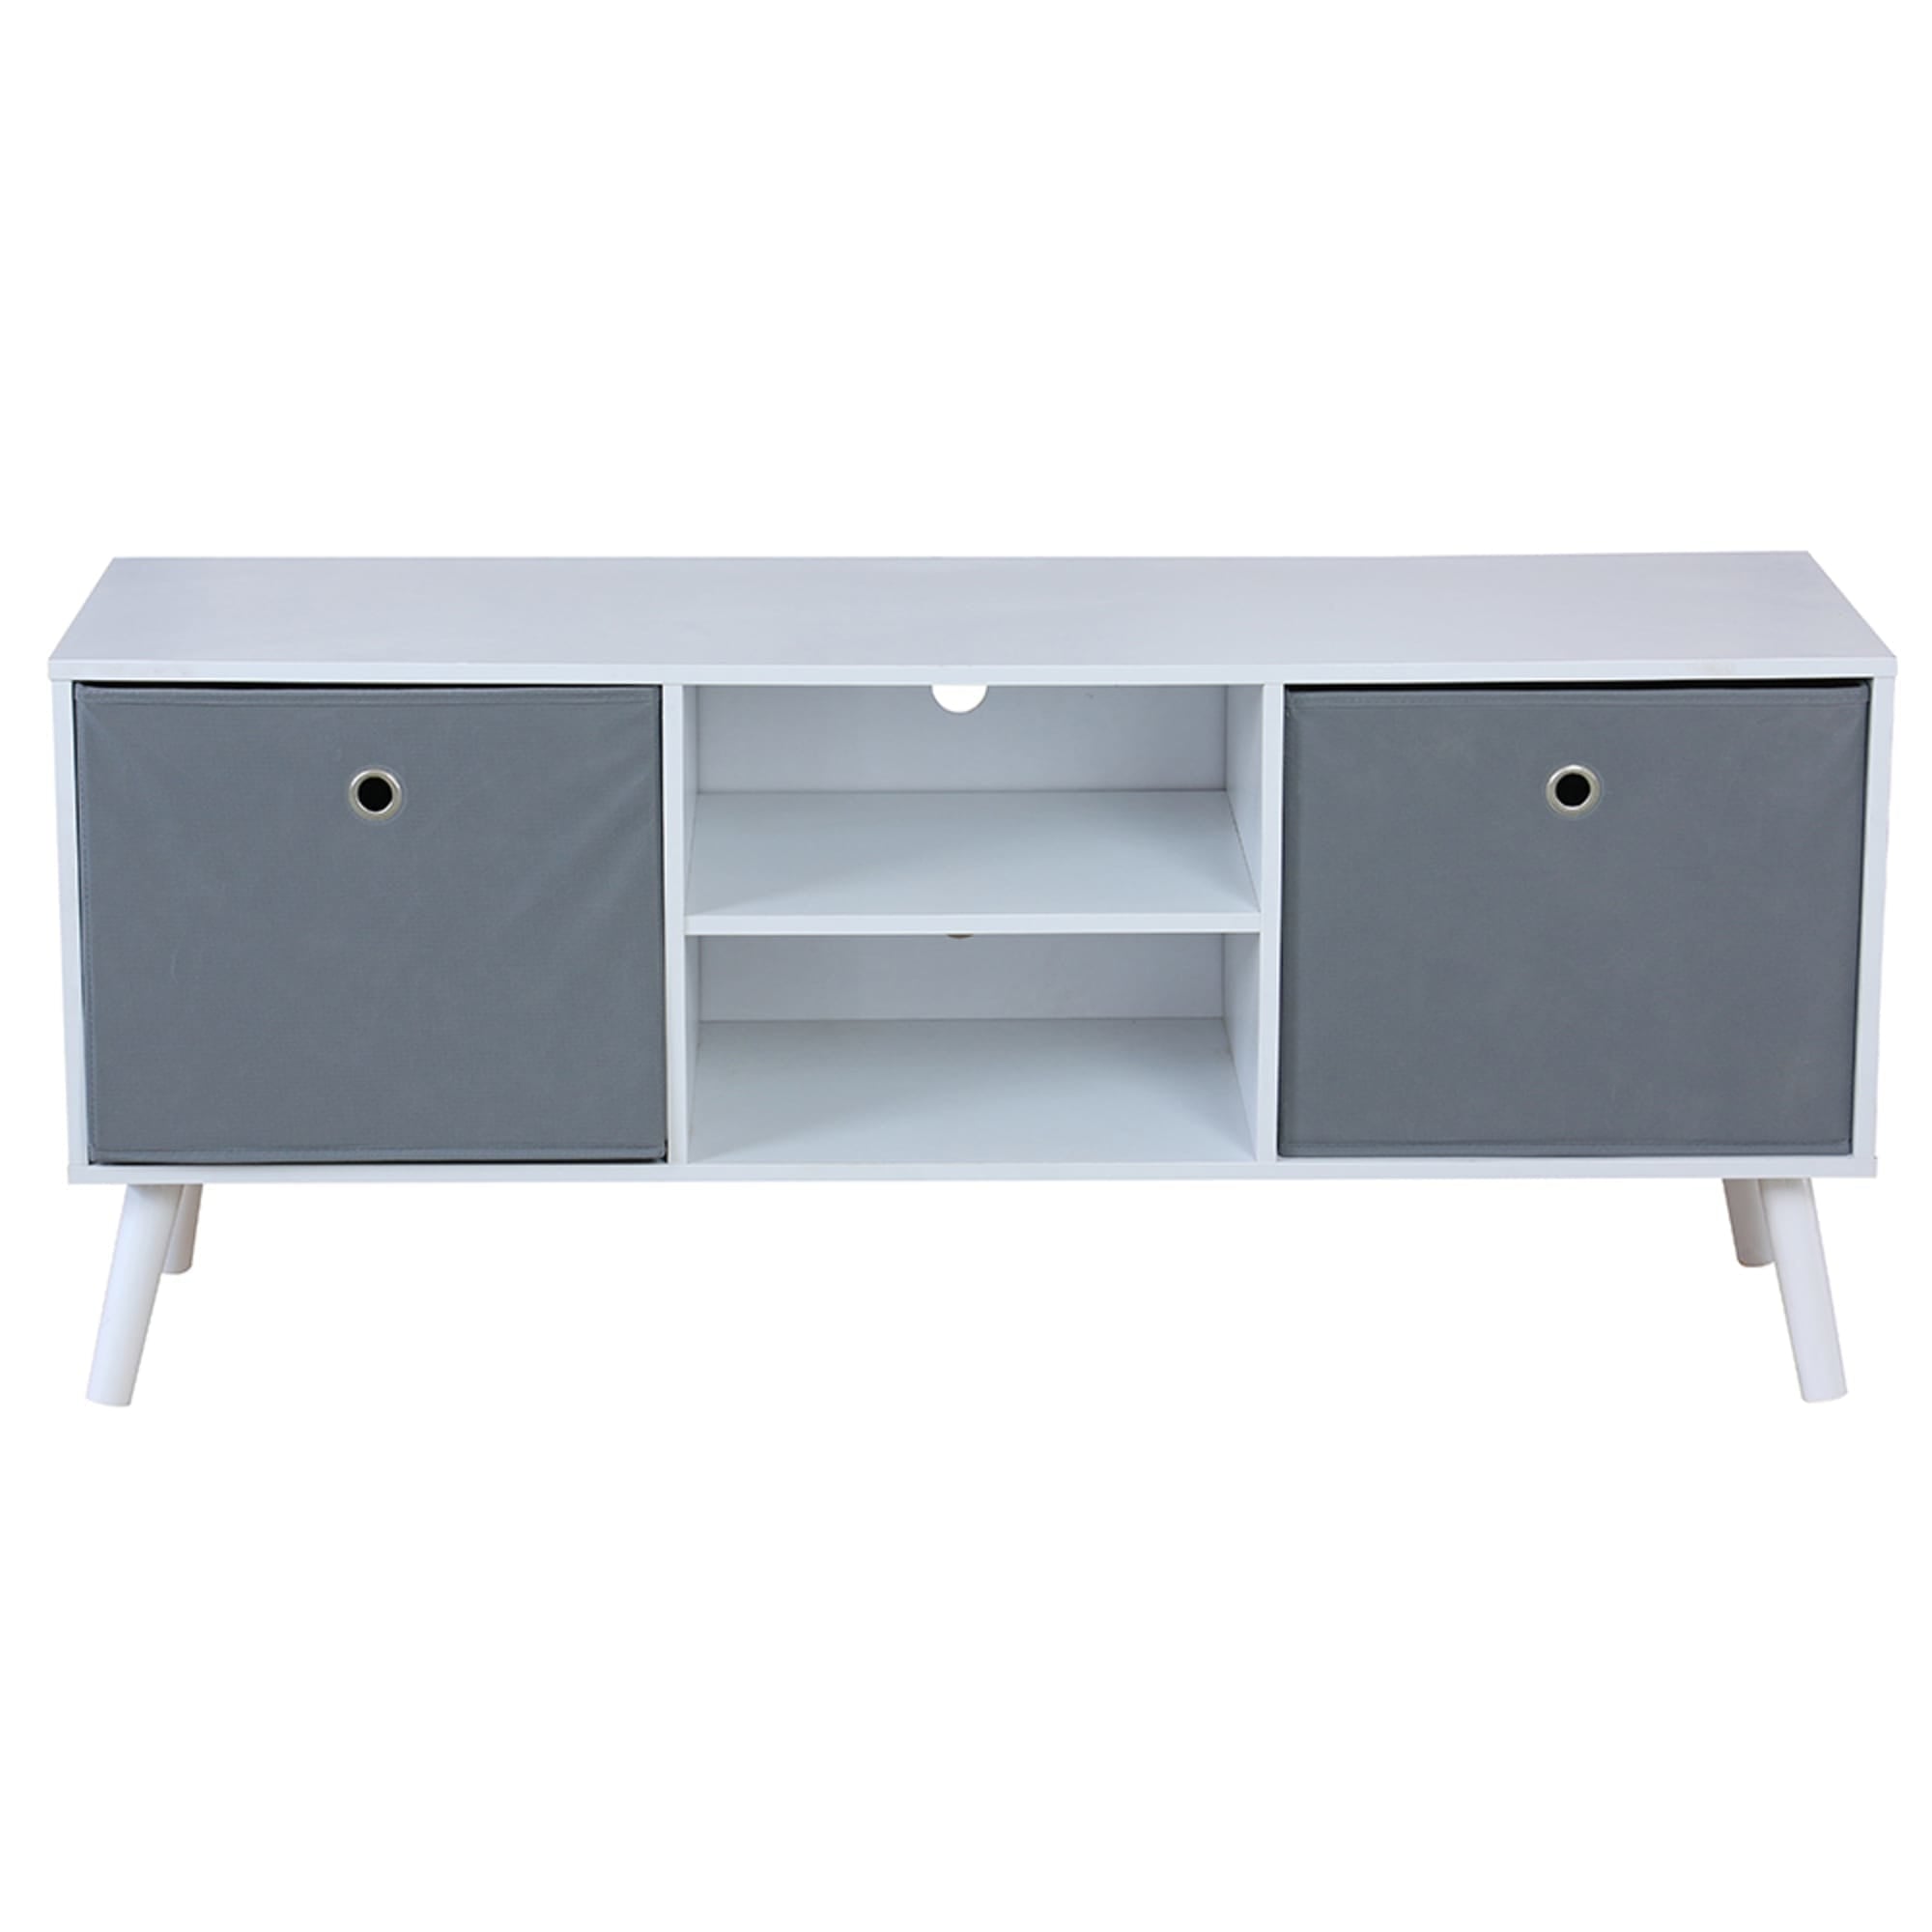 Home Basics TV Stand with 2 Non-Woven Bins, White $40.00 EACH, CASE PACK OF 1